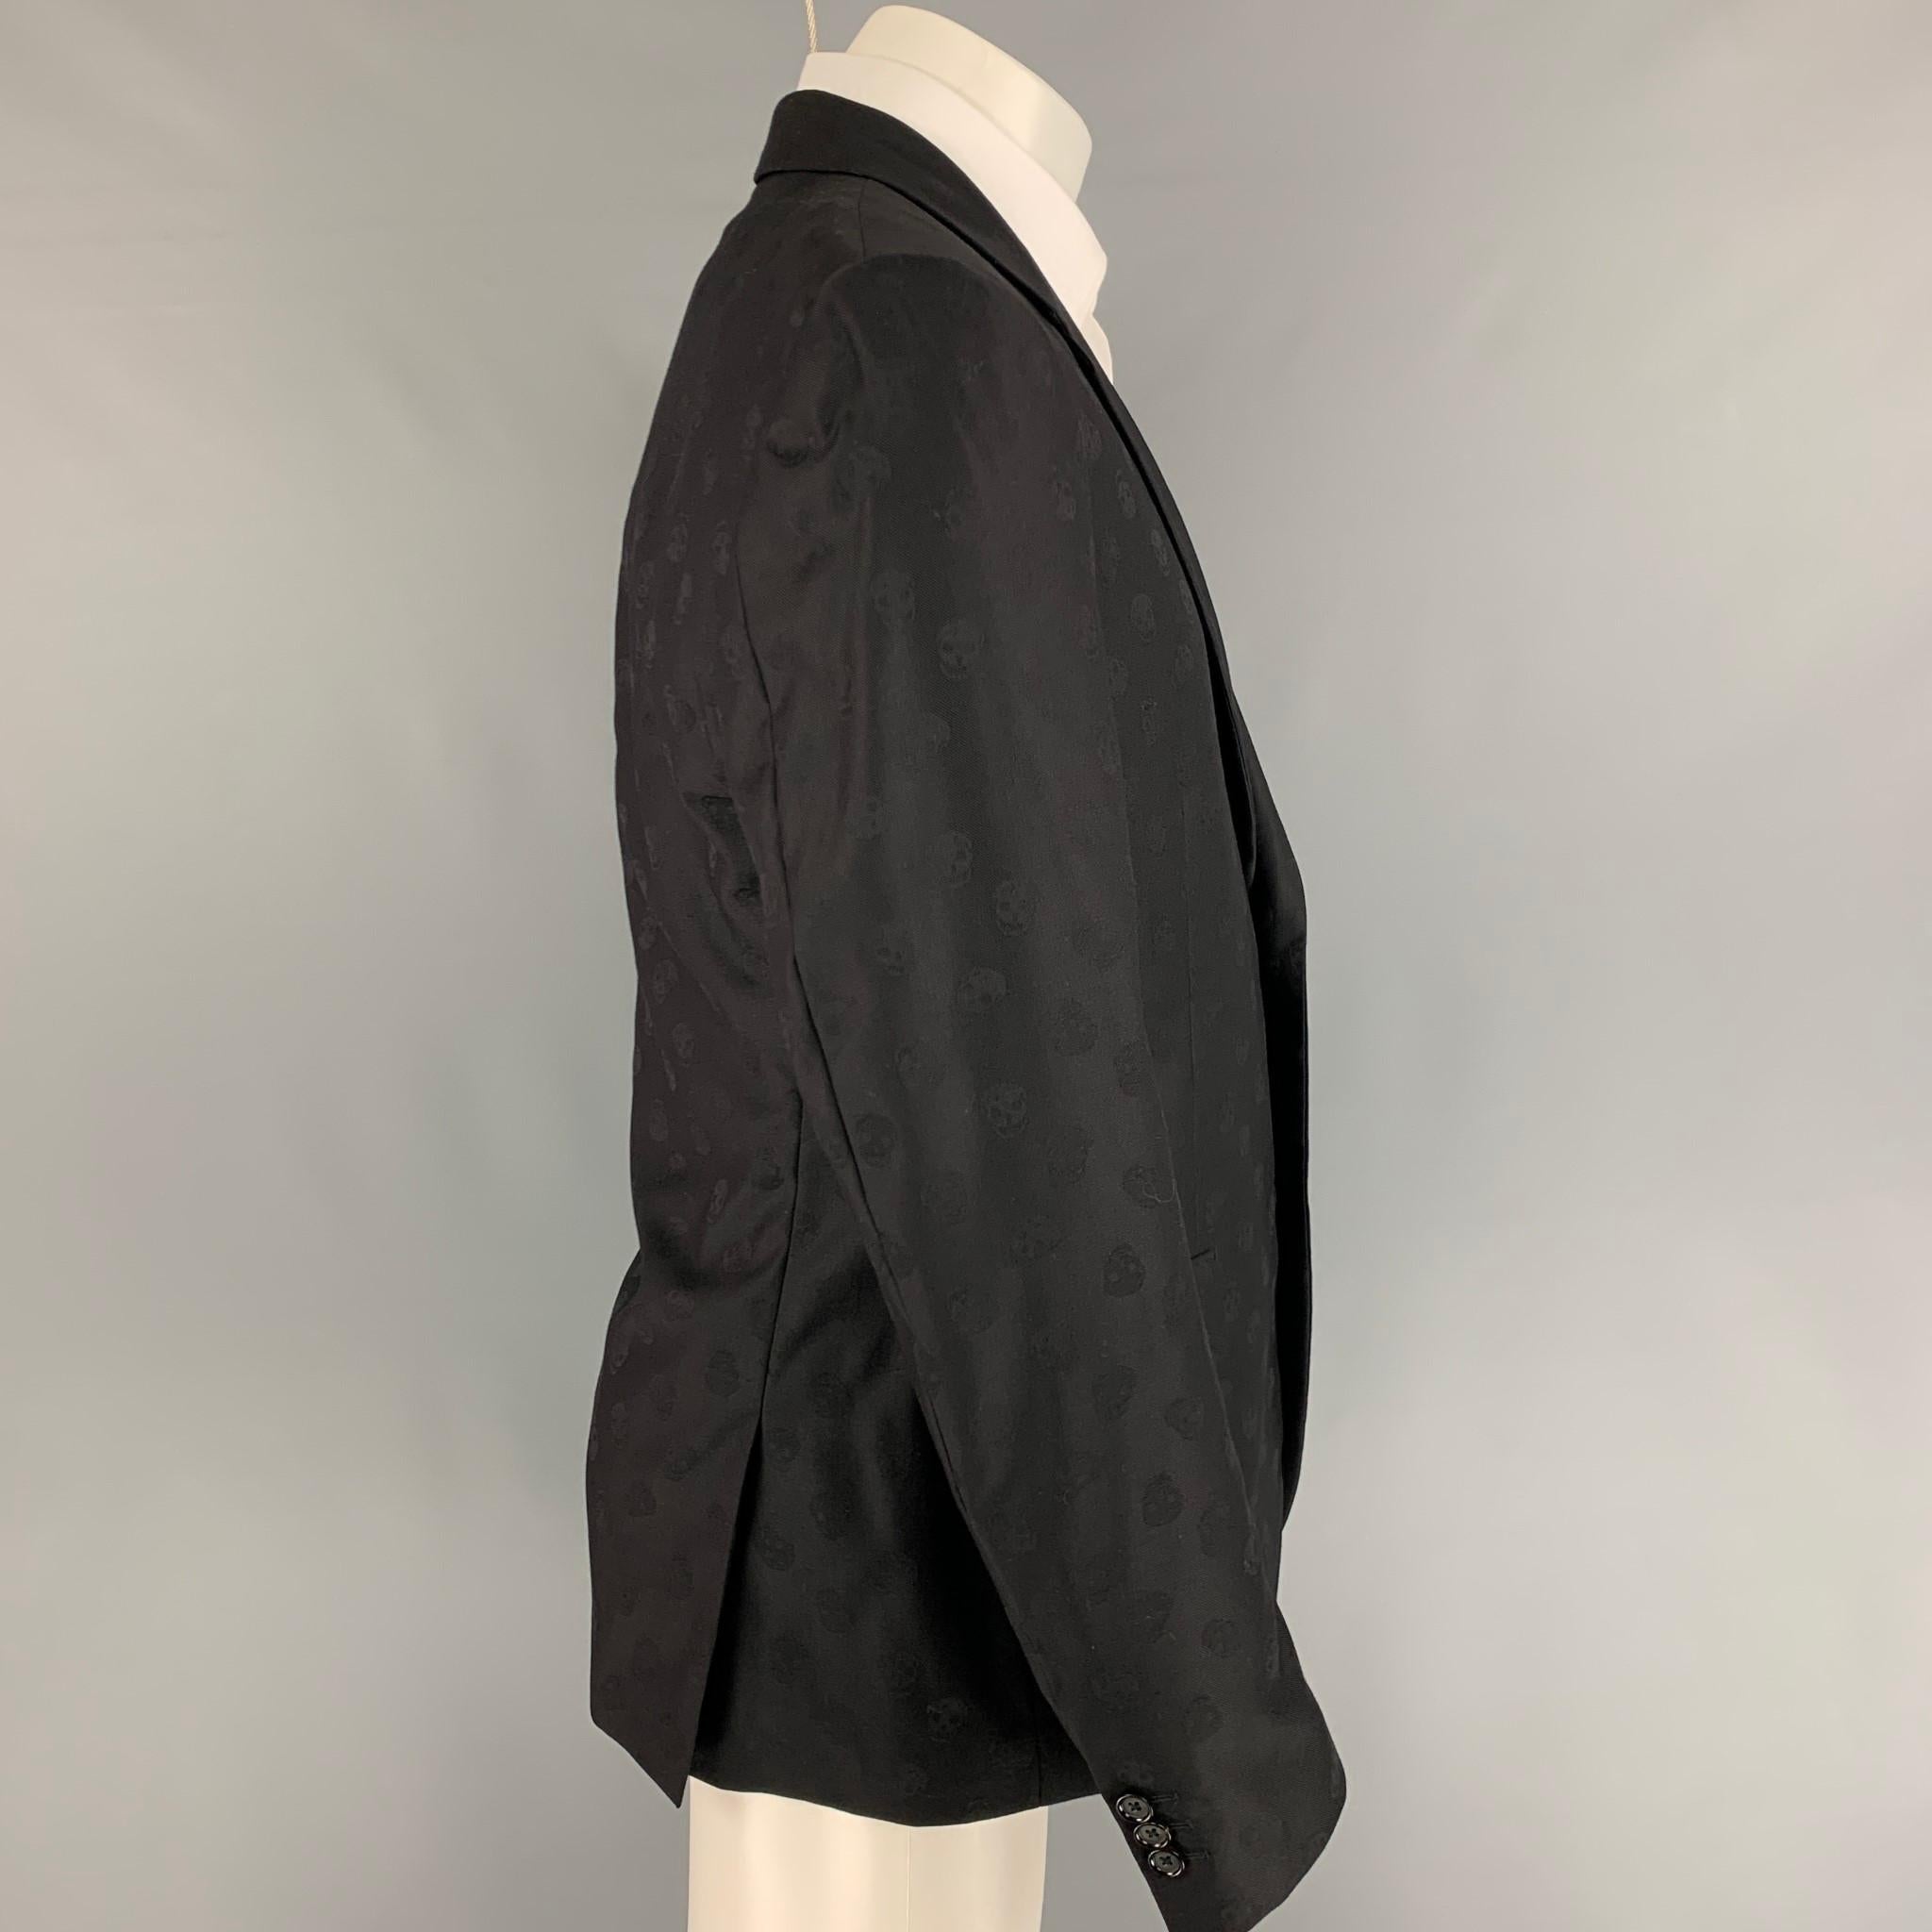 ALEXANDER McQUEEN sport coat comes in a black skull print wool with a full liner featuring a notch lapel, flap pockets, double back vent, and a double button closure. Made in Italy. 

Very Good Pre-Owned Condition.
Marked: